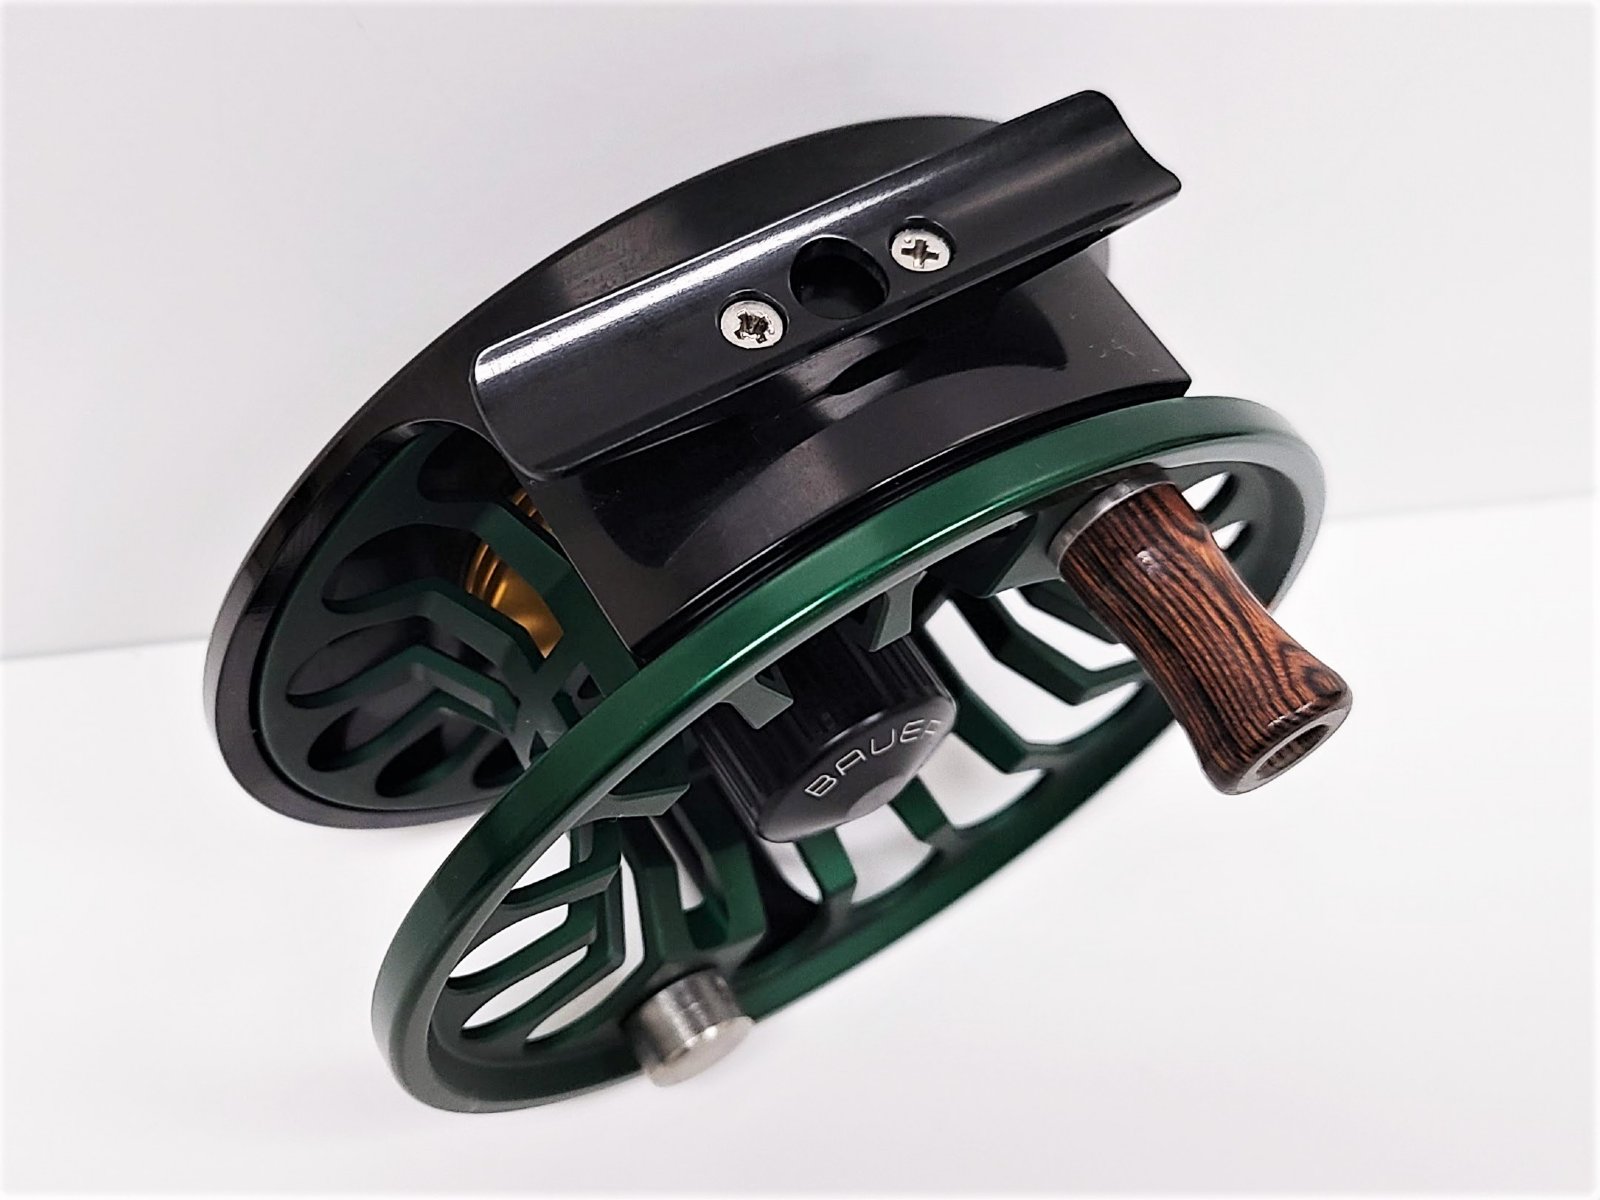 Bauer RX 6 Fly Reel - Black w/ Green - NEW - FREE FLY LINE